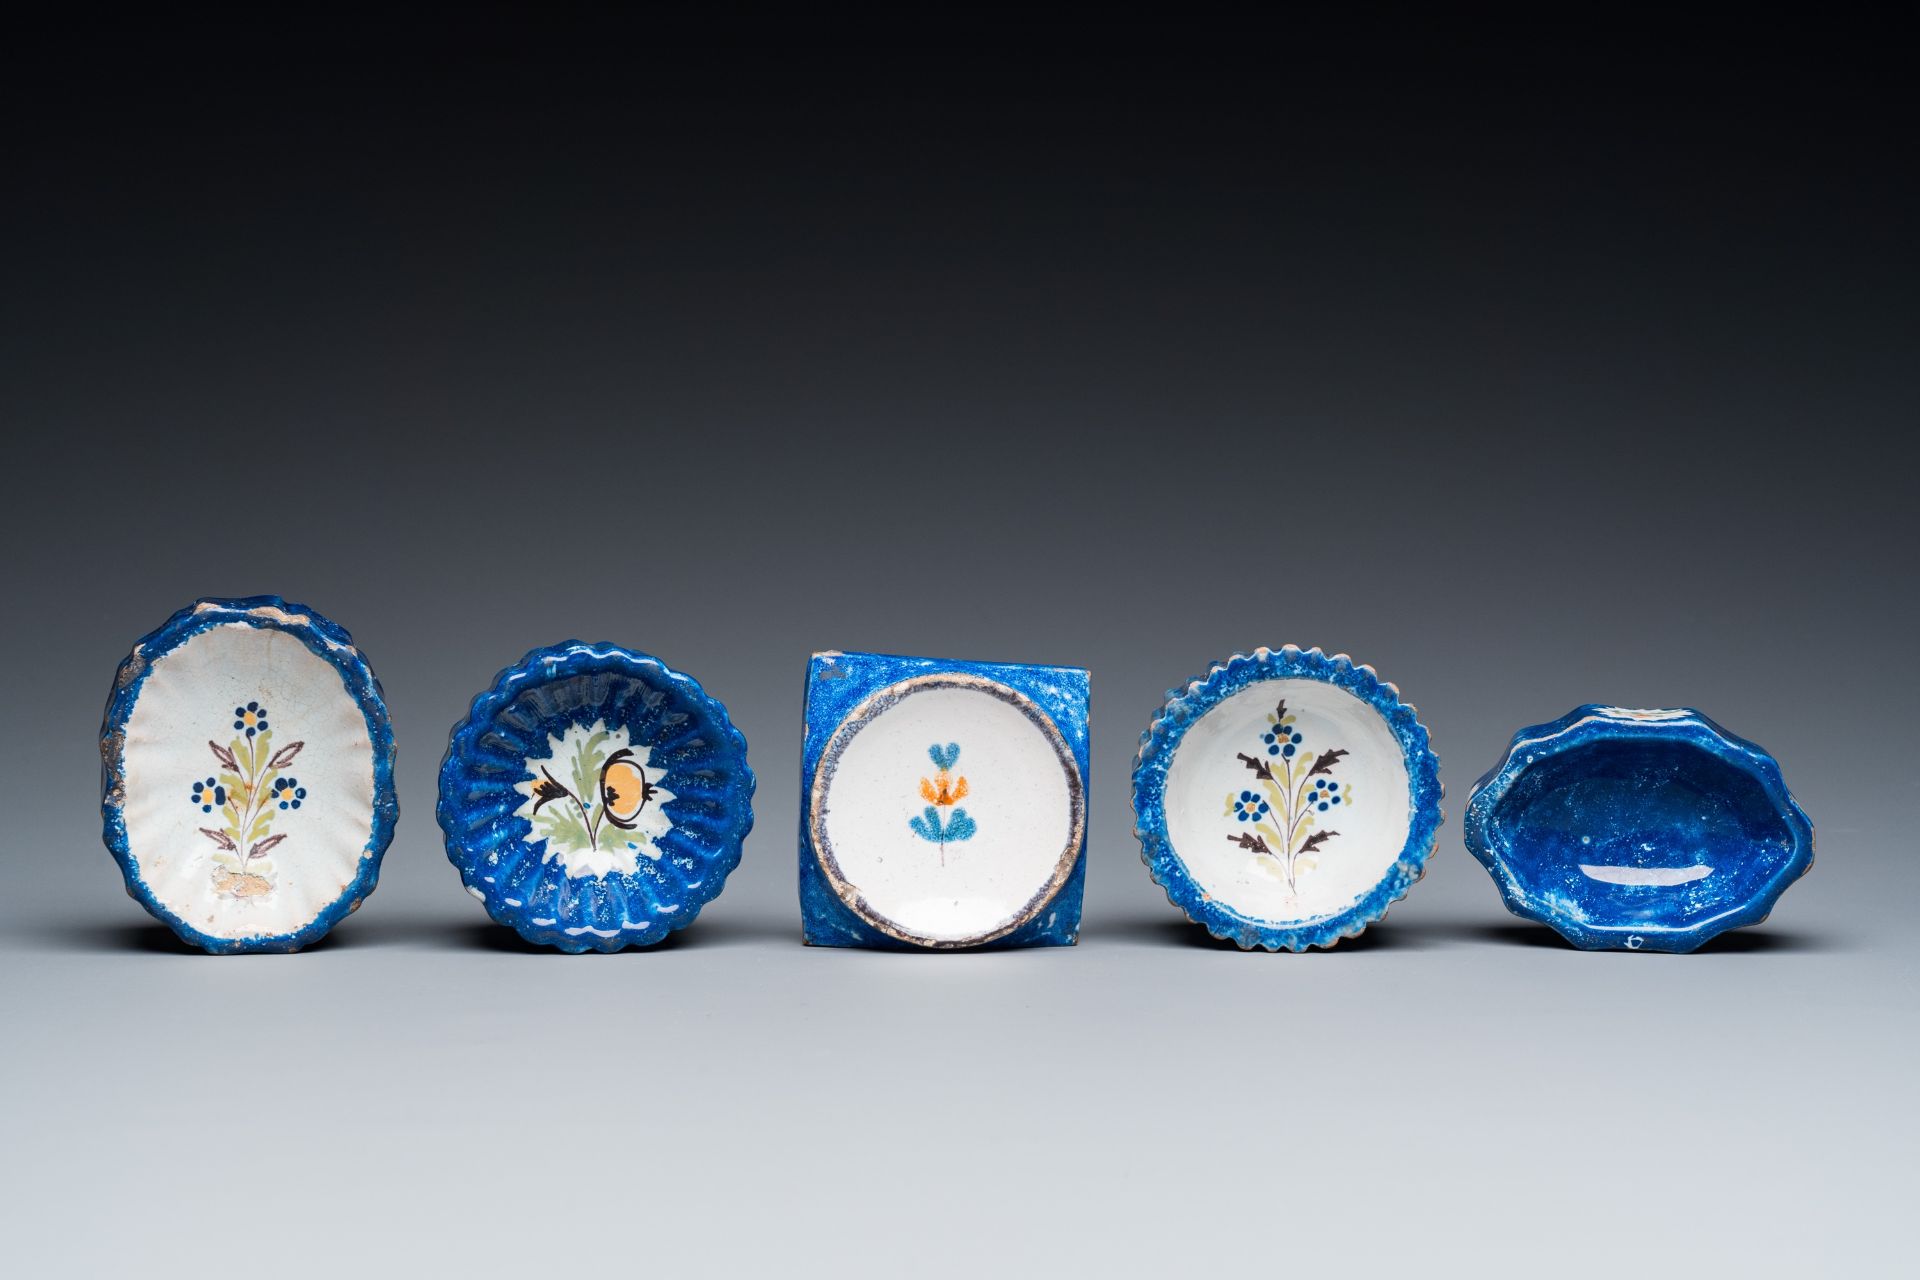 Five polychrome Brussels faience salts, 18/19th C. - Image 3 of 8